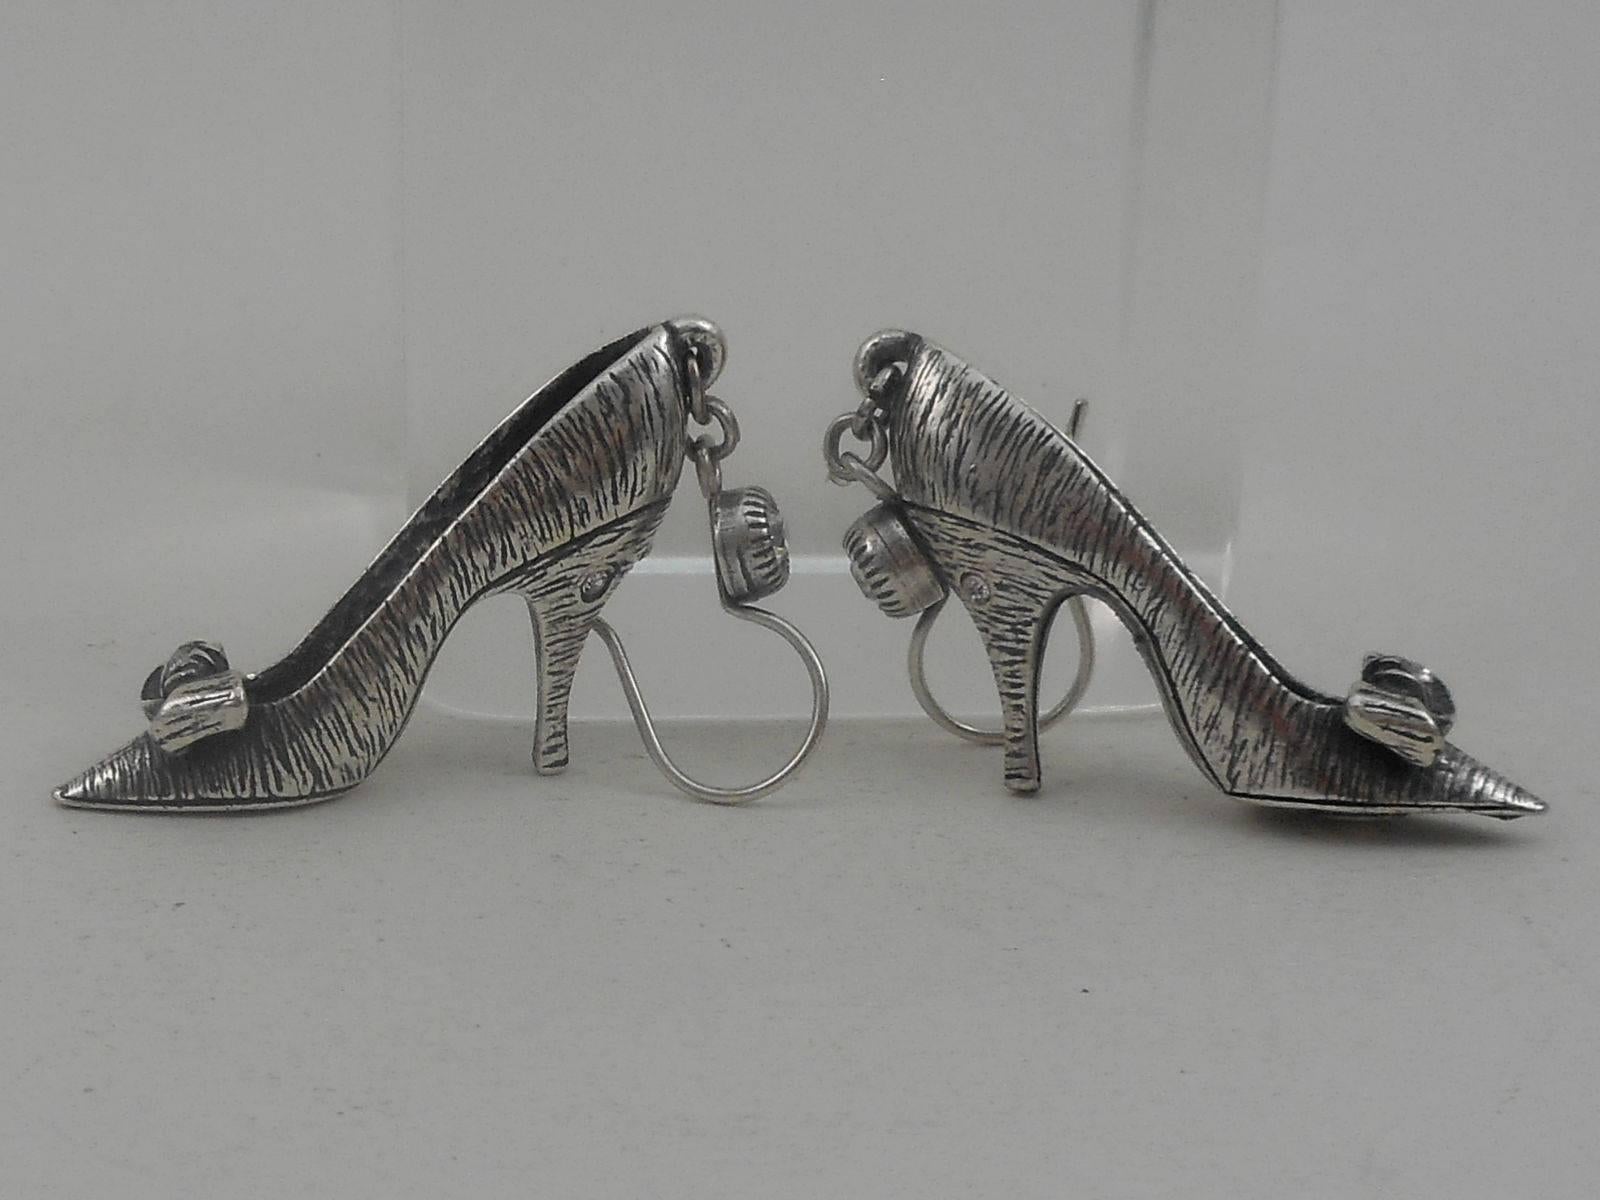 Antiqued Silver Plated Shoes set with Faux Diamonds. Top of earring and shoes set with round a Faux Diamond; further enhanced with Faux Diamonds on heels! Hook earring fittings. Earring measure approx. 2.25'' x 0.25''; Signed: Askew London. An